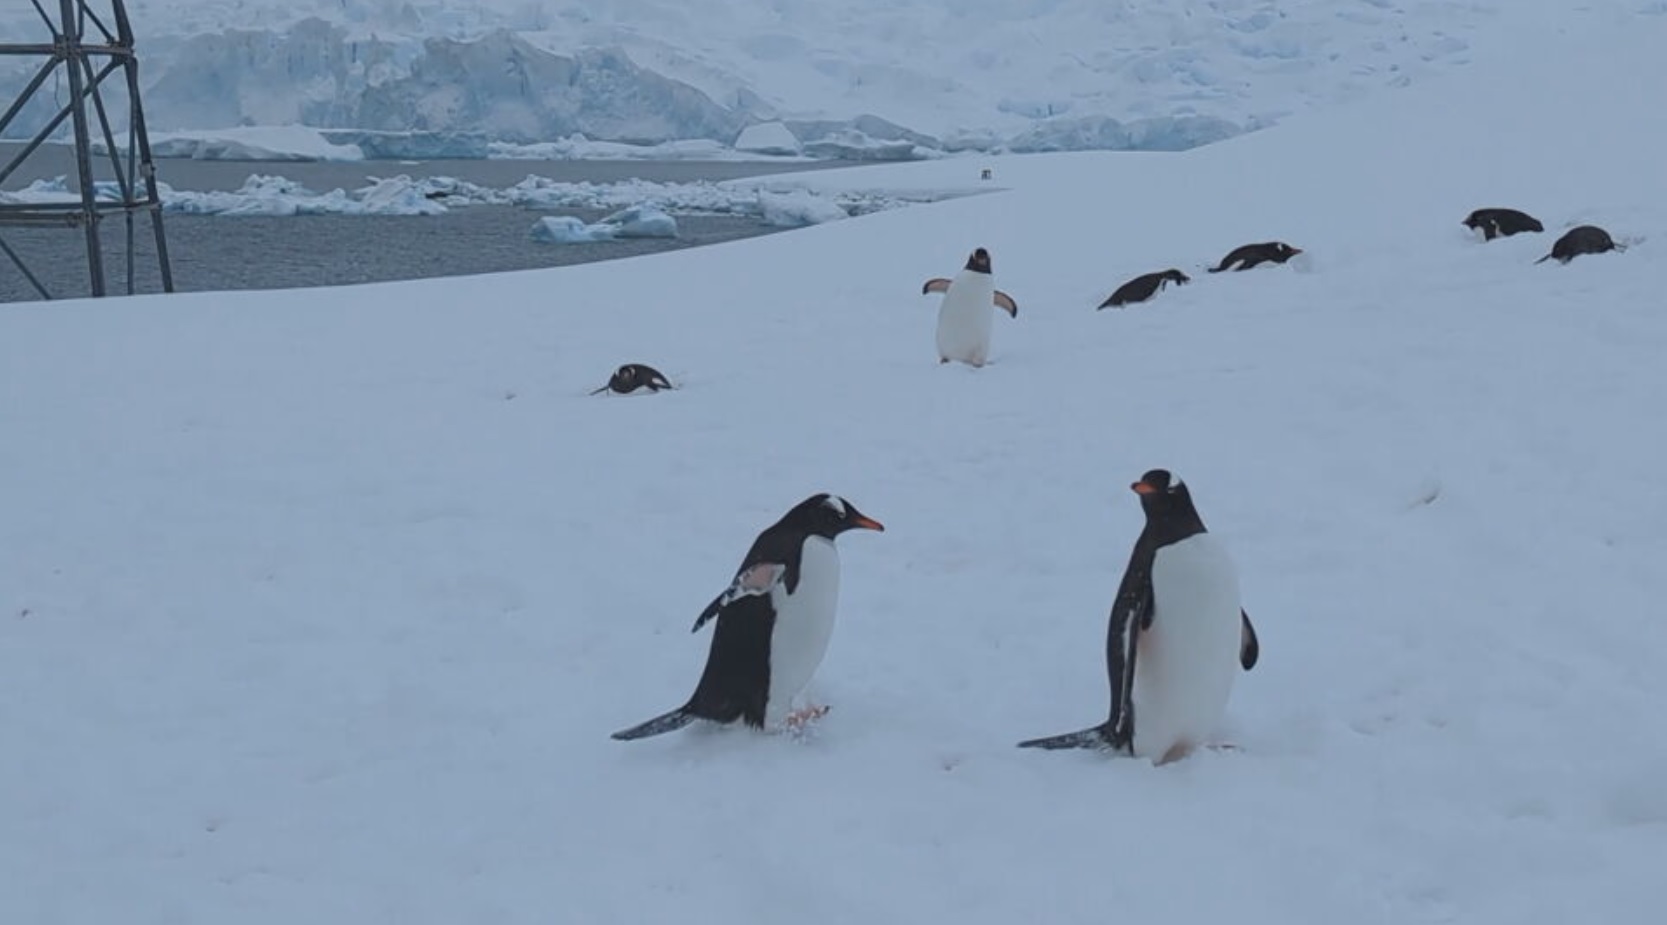 Dr Wade said a number of penguin colonies have failed in the last year